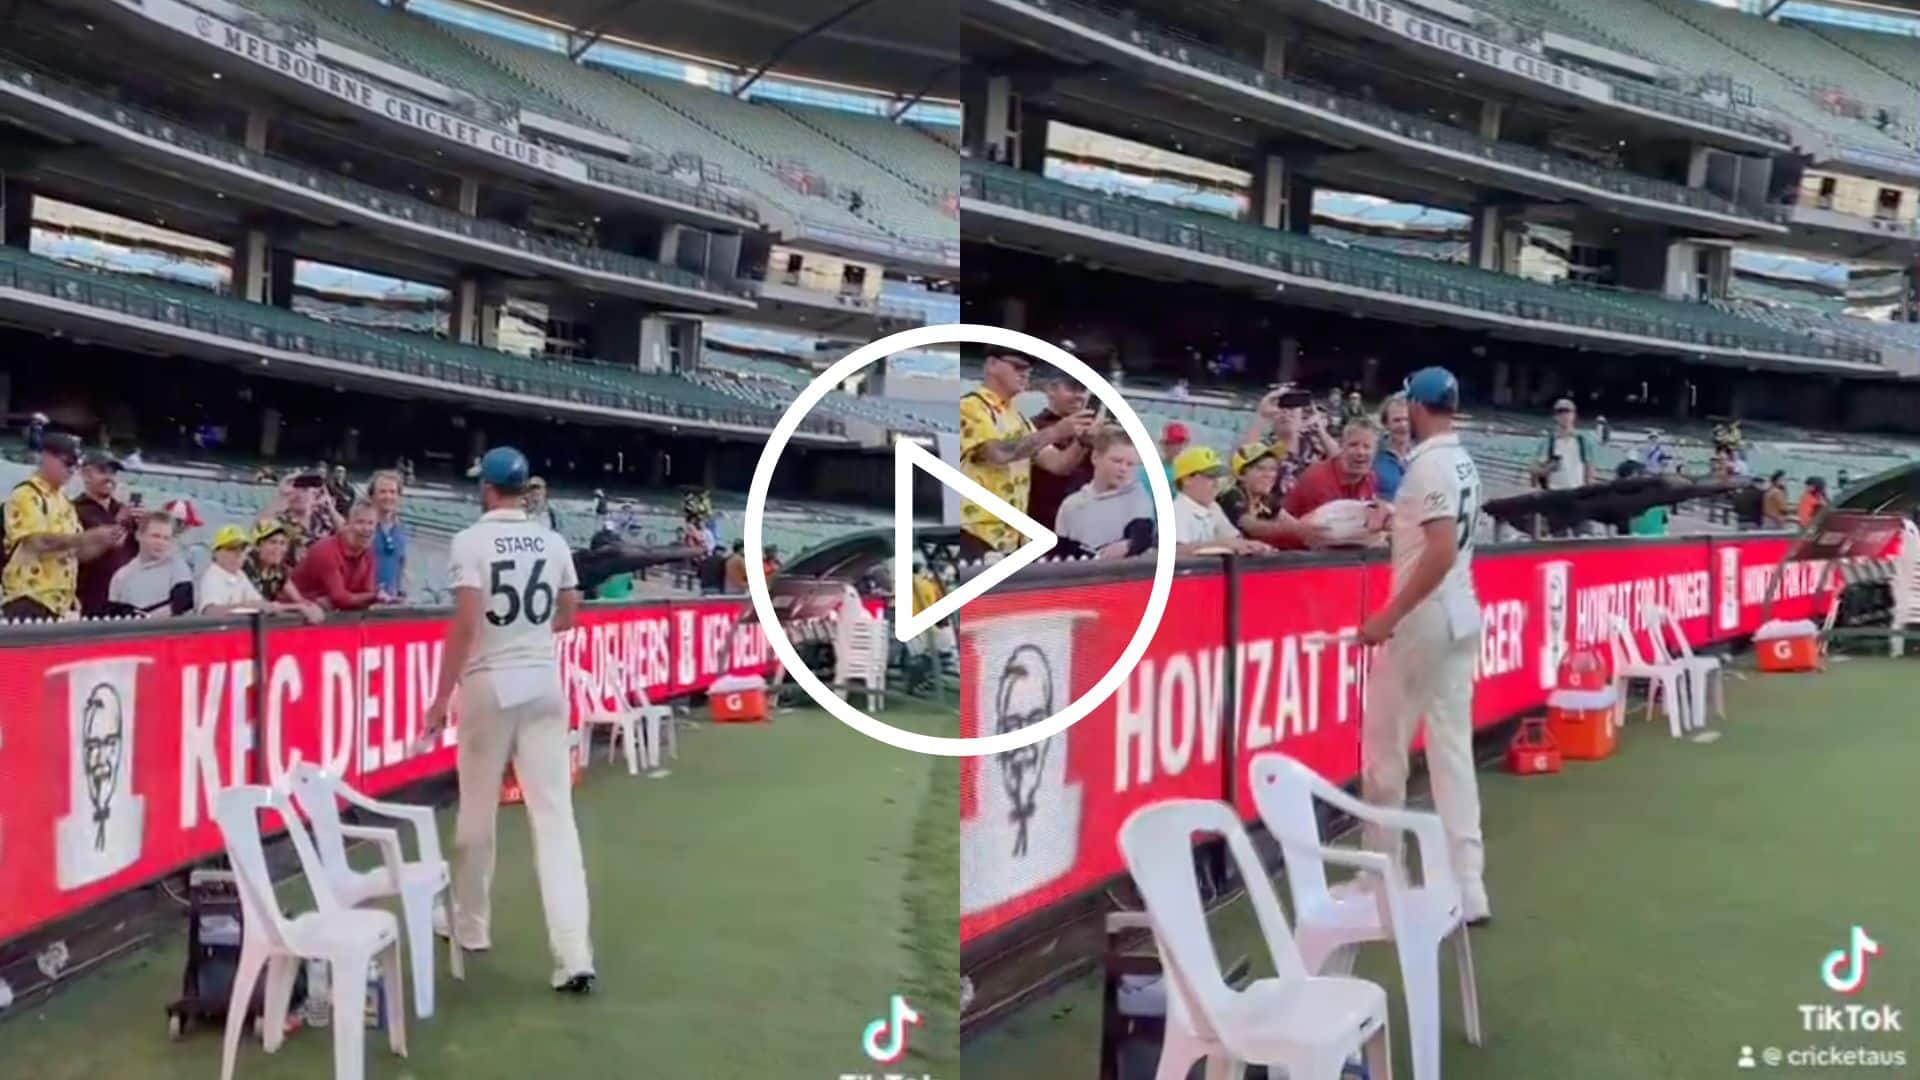 [Watch] Mitchell Starc Gifts His Boots To A Lucky Fan After Australia Thrash PAK At MCG